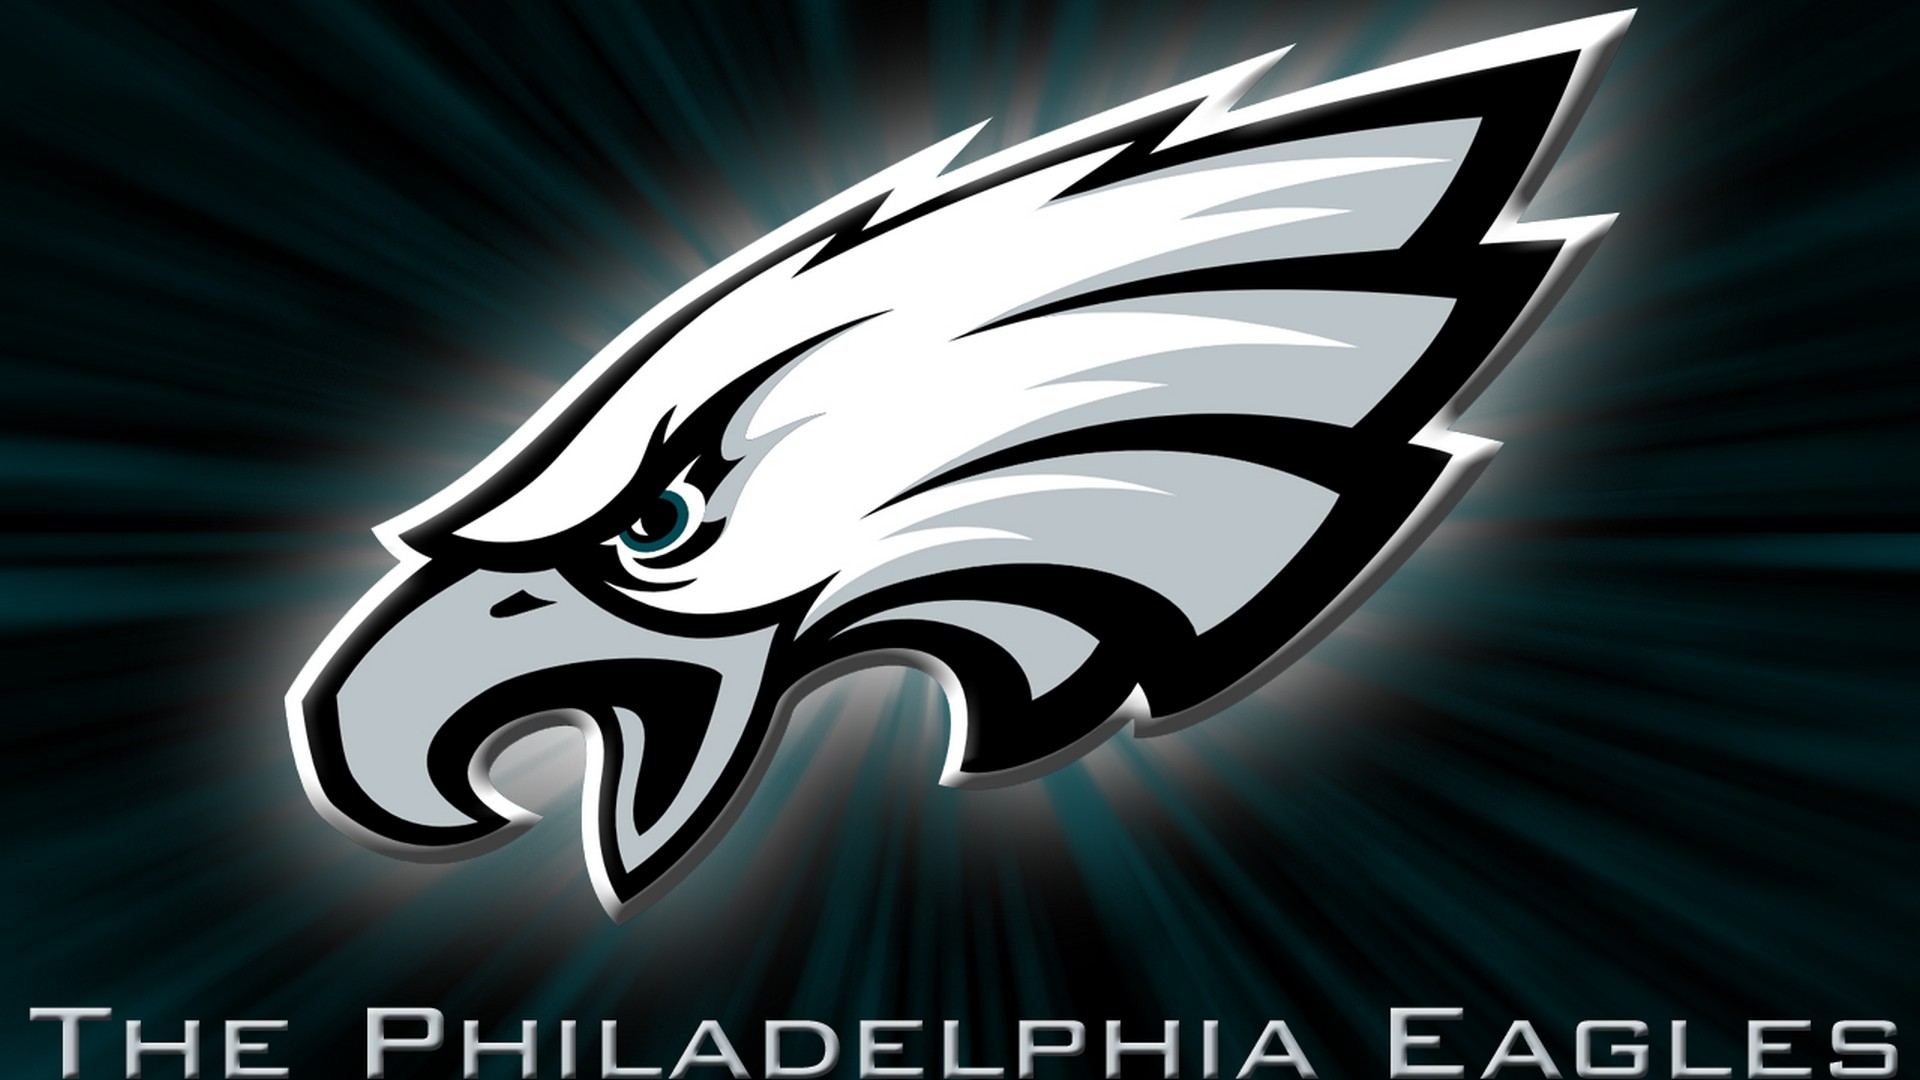 NFL Eagles Mac Backgrounds With Resolution 1920X1080 pixel. You can make this wallpaper for your Mac or Windows Desktop Background, iPhone, Android or Tablet and another Smartphone device for free